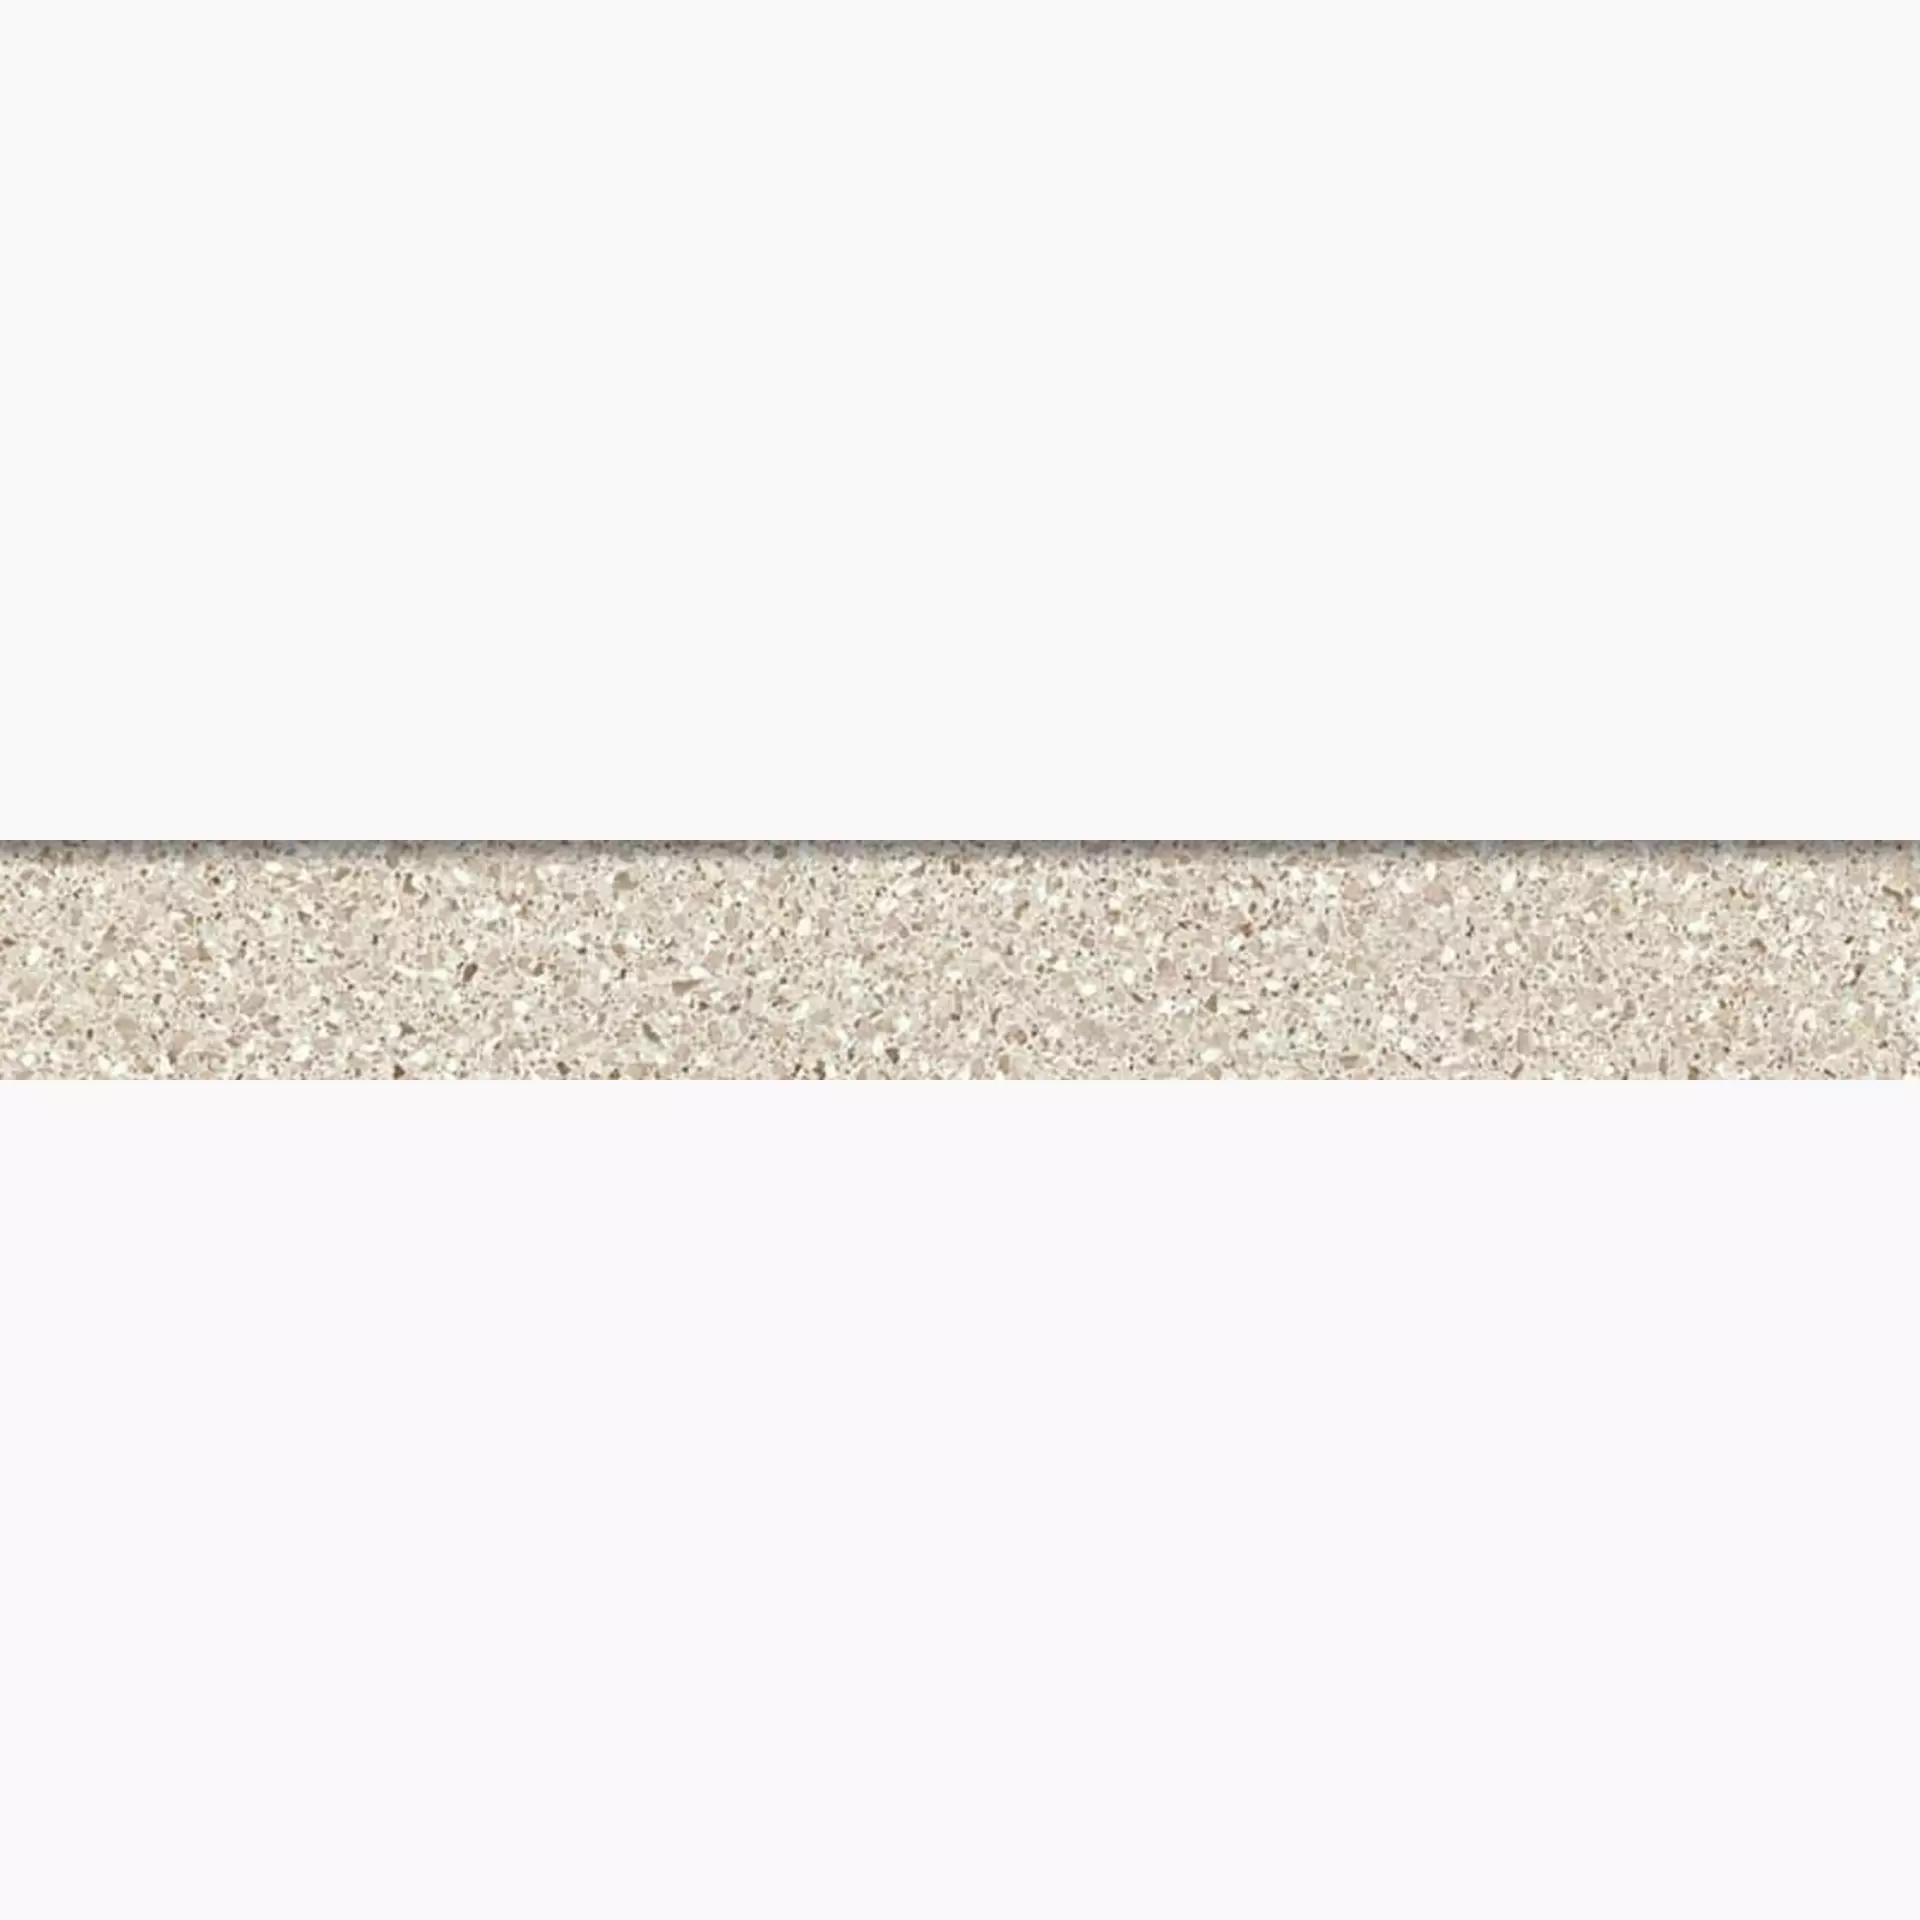 Sant Agostino Newdeco' Sand Natural Skirting board CSABNDSN60 7,3x60cm rectified 10mm